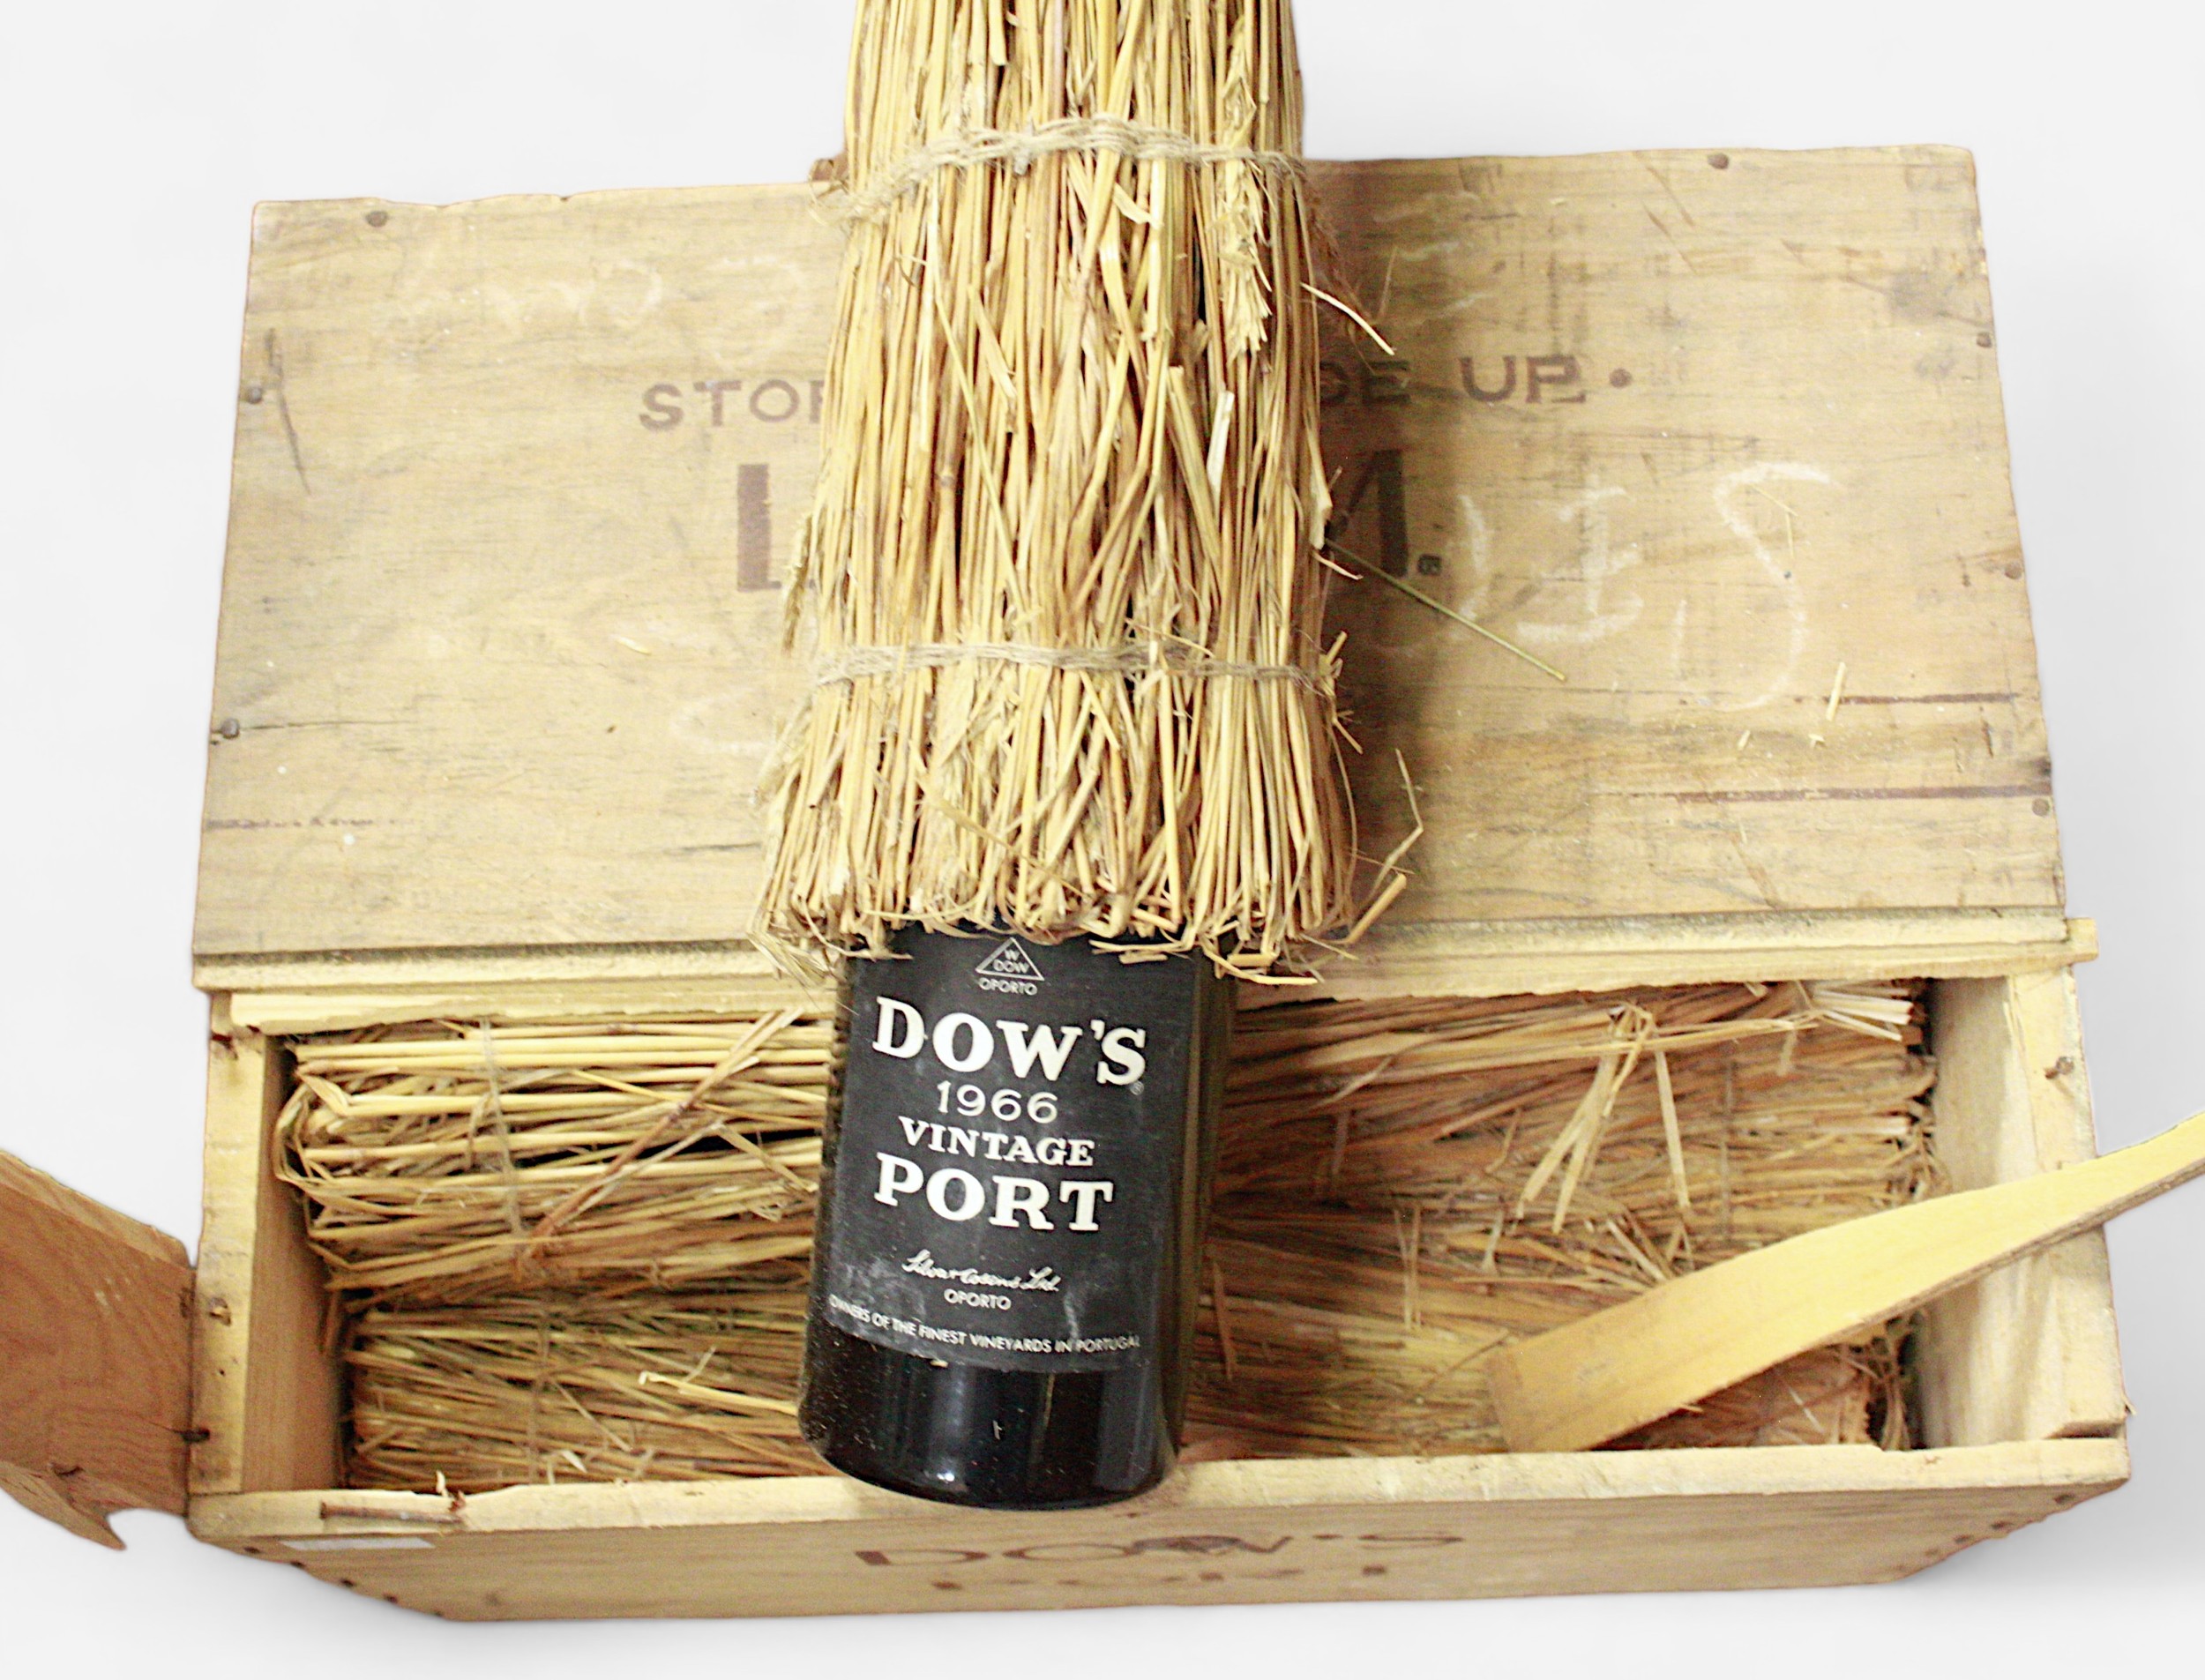 A case of 12 bottles of 1966 vintage Dow’s port, all unopened with labels intact and wax seals to - Image 2 of 2